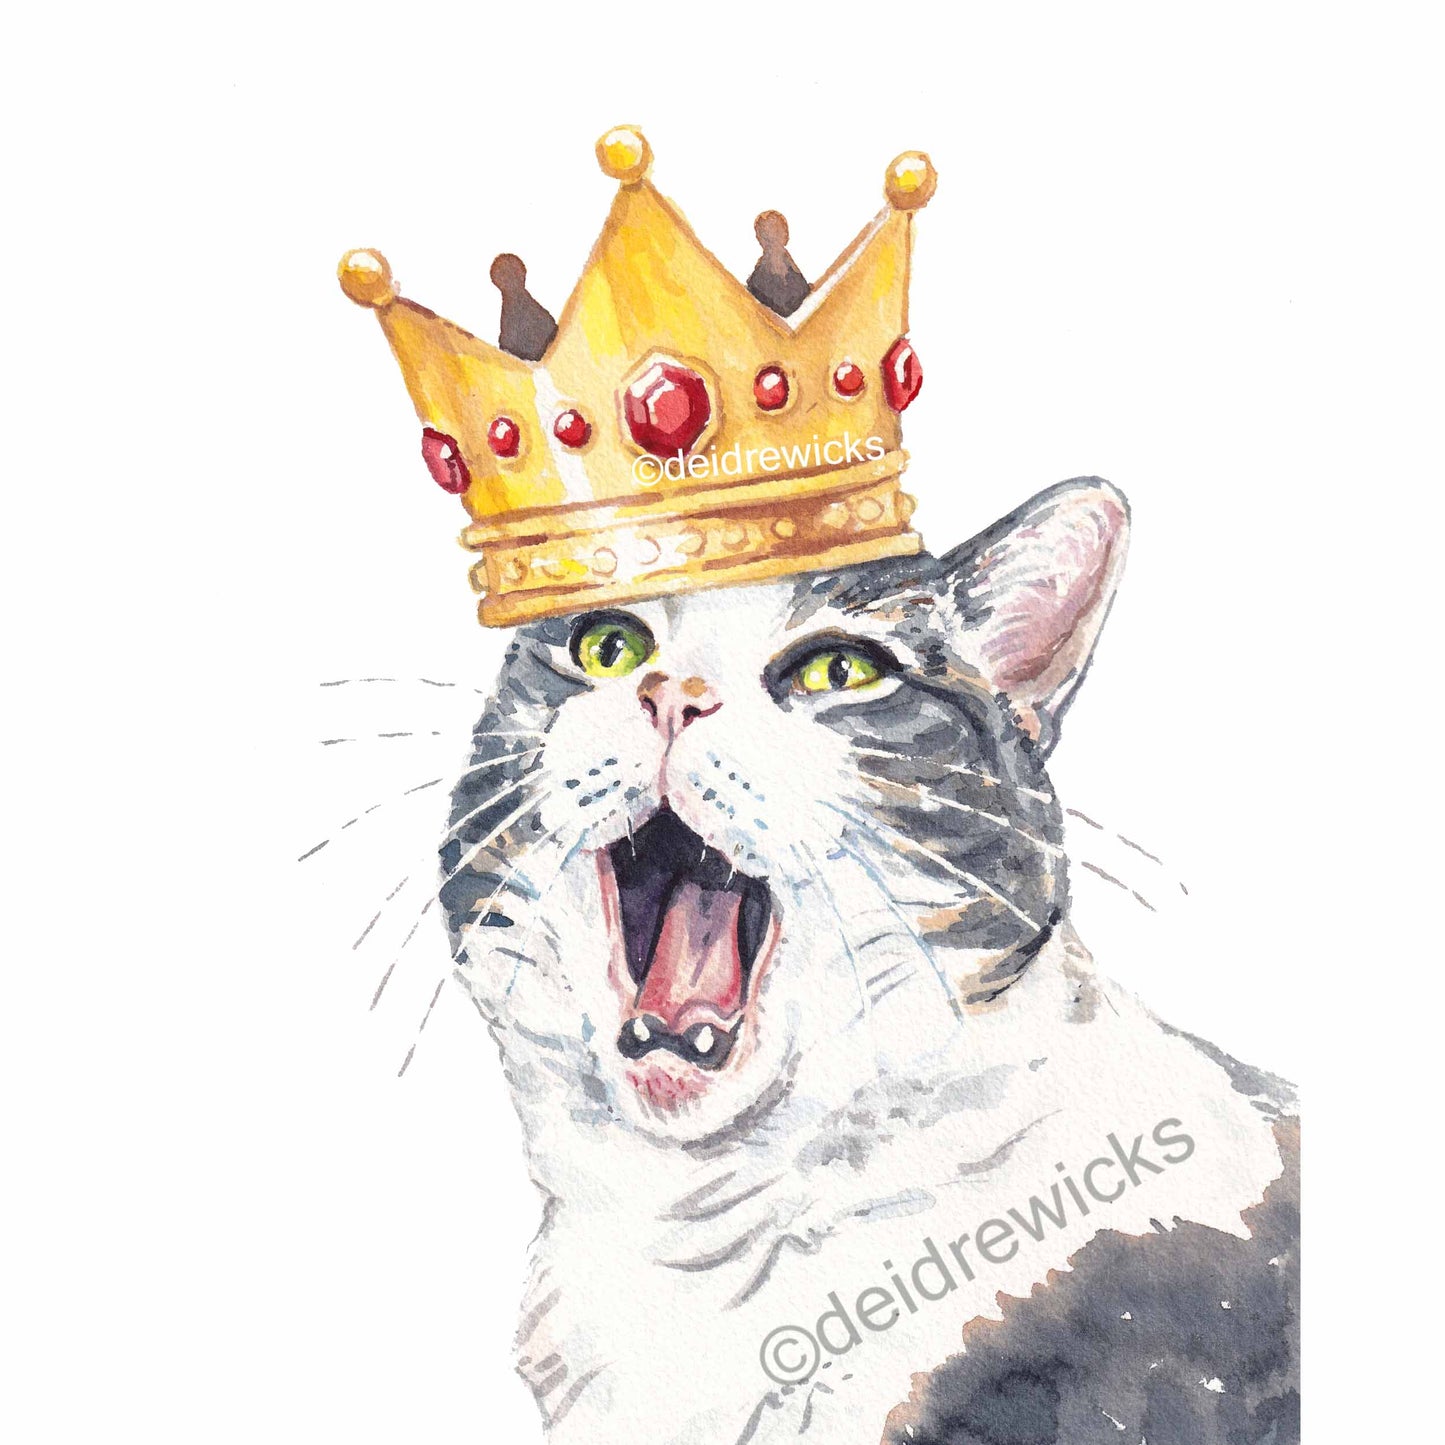 Watercolour painting of a grey tabby cat wearing a gold crown while complaining. Art by Deidre Wicks